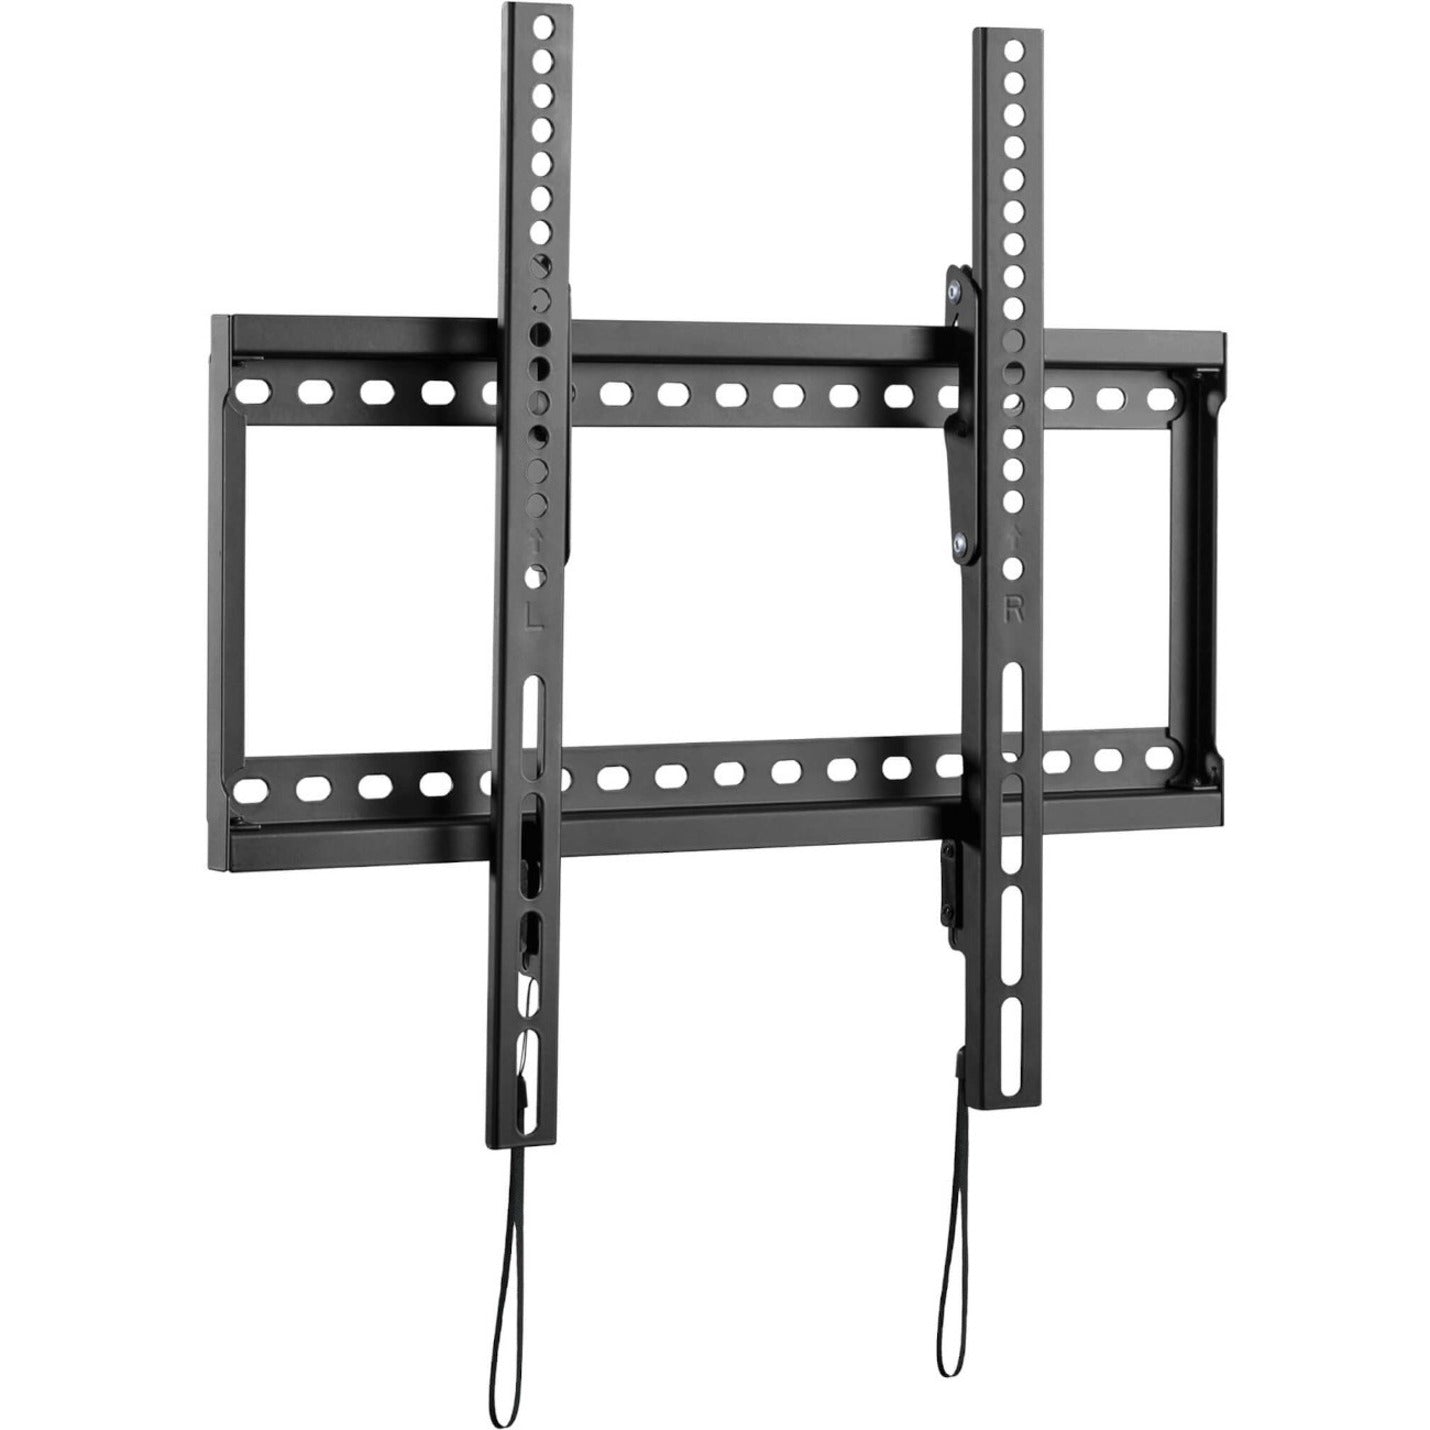 Tripp Lite DWT2670XE Heavy-Duty Tilt Wall Mount for 26-70" Curved or Flat-Screen Displays, Low Profile, 165 lb Load Capacity